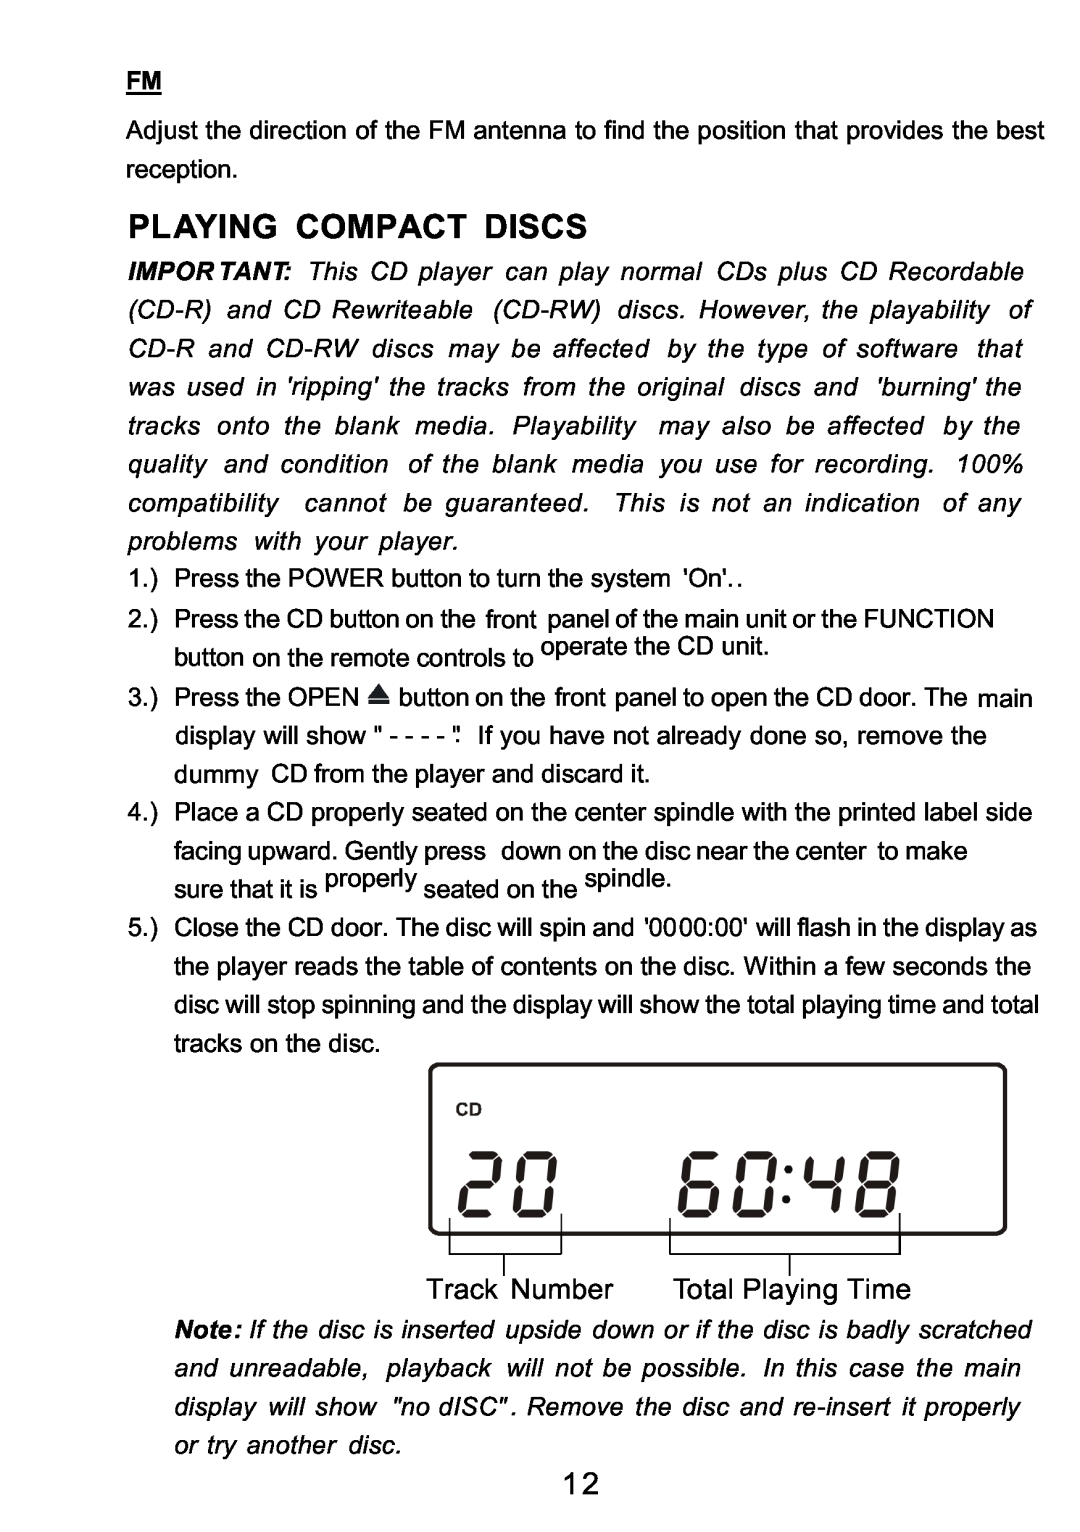 Sylvania SRCD3830 instruction manual Playing Compact Discs, Track Number, Total Playing Time 